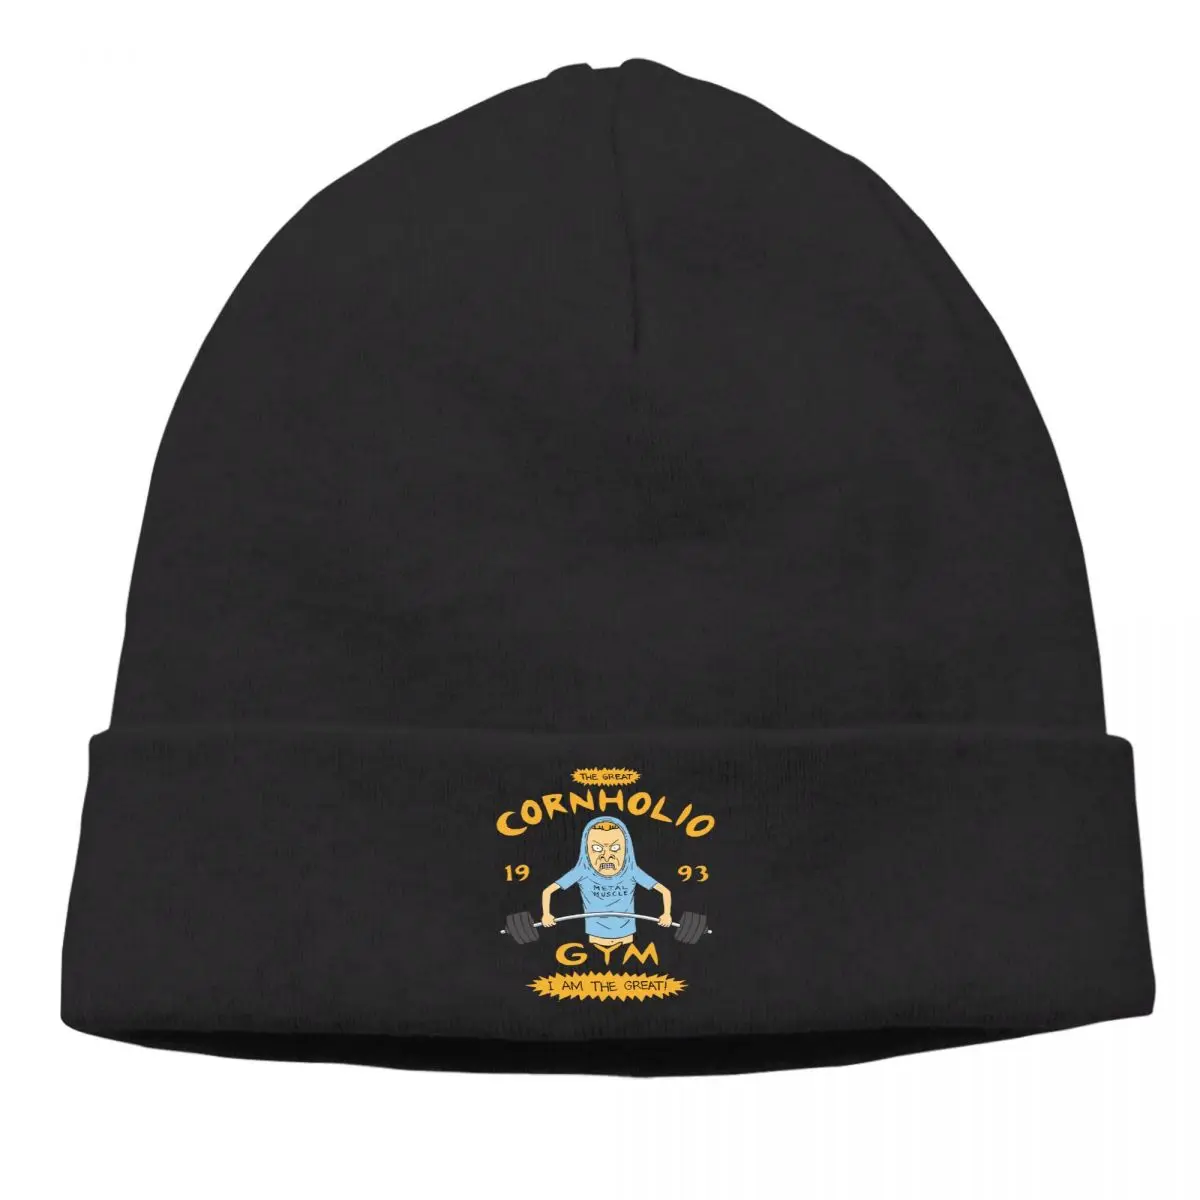 

Cornholio Gym Inspired Bonnet Homme Outdoor Knitted Hat Beavis and ButtHead Chat Hilarious Animation Skullies Beanies